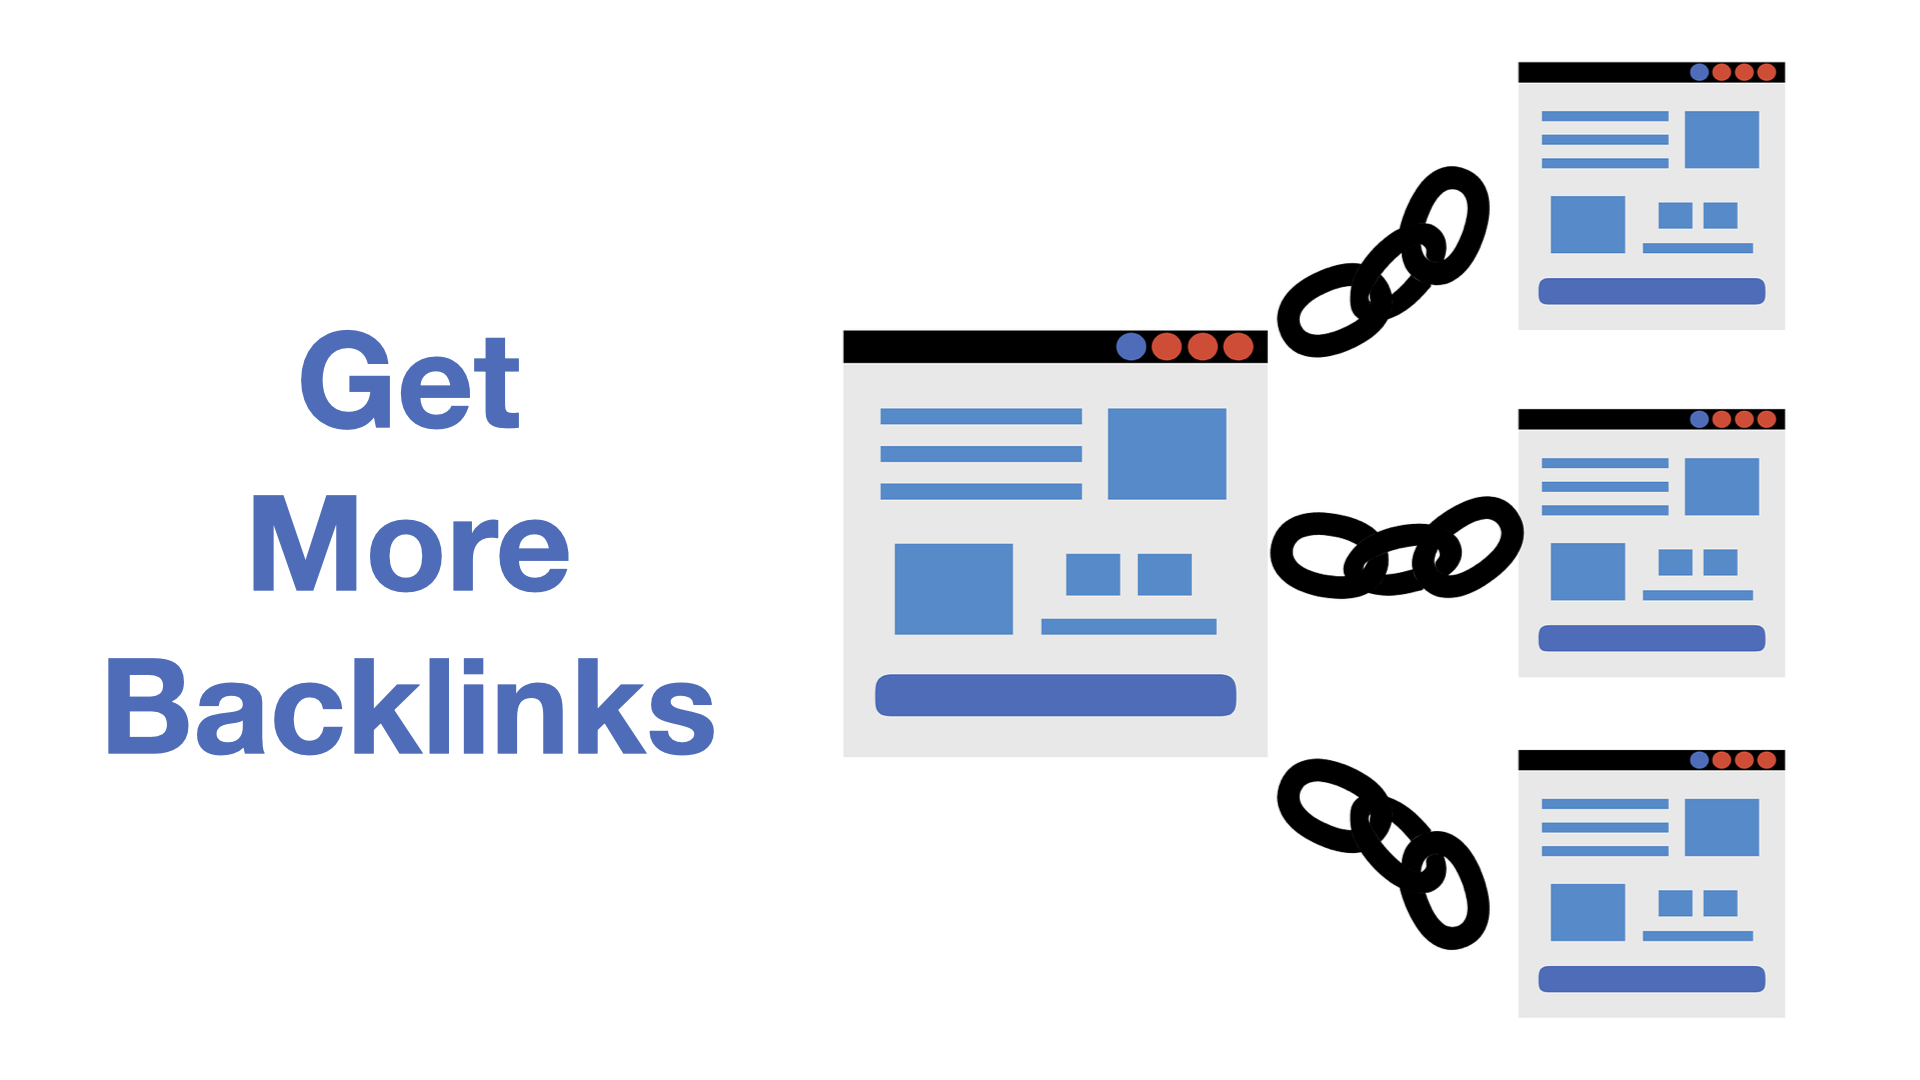 This image shows one website with chain links representing backlinks to three other websites